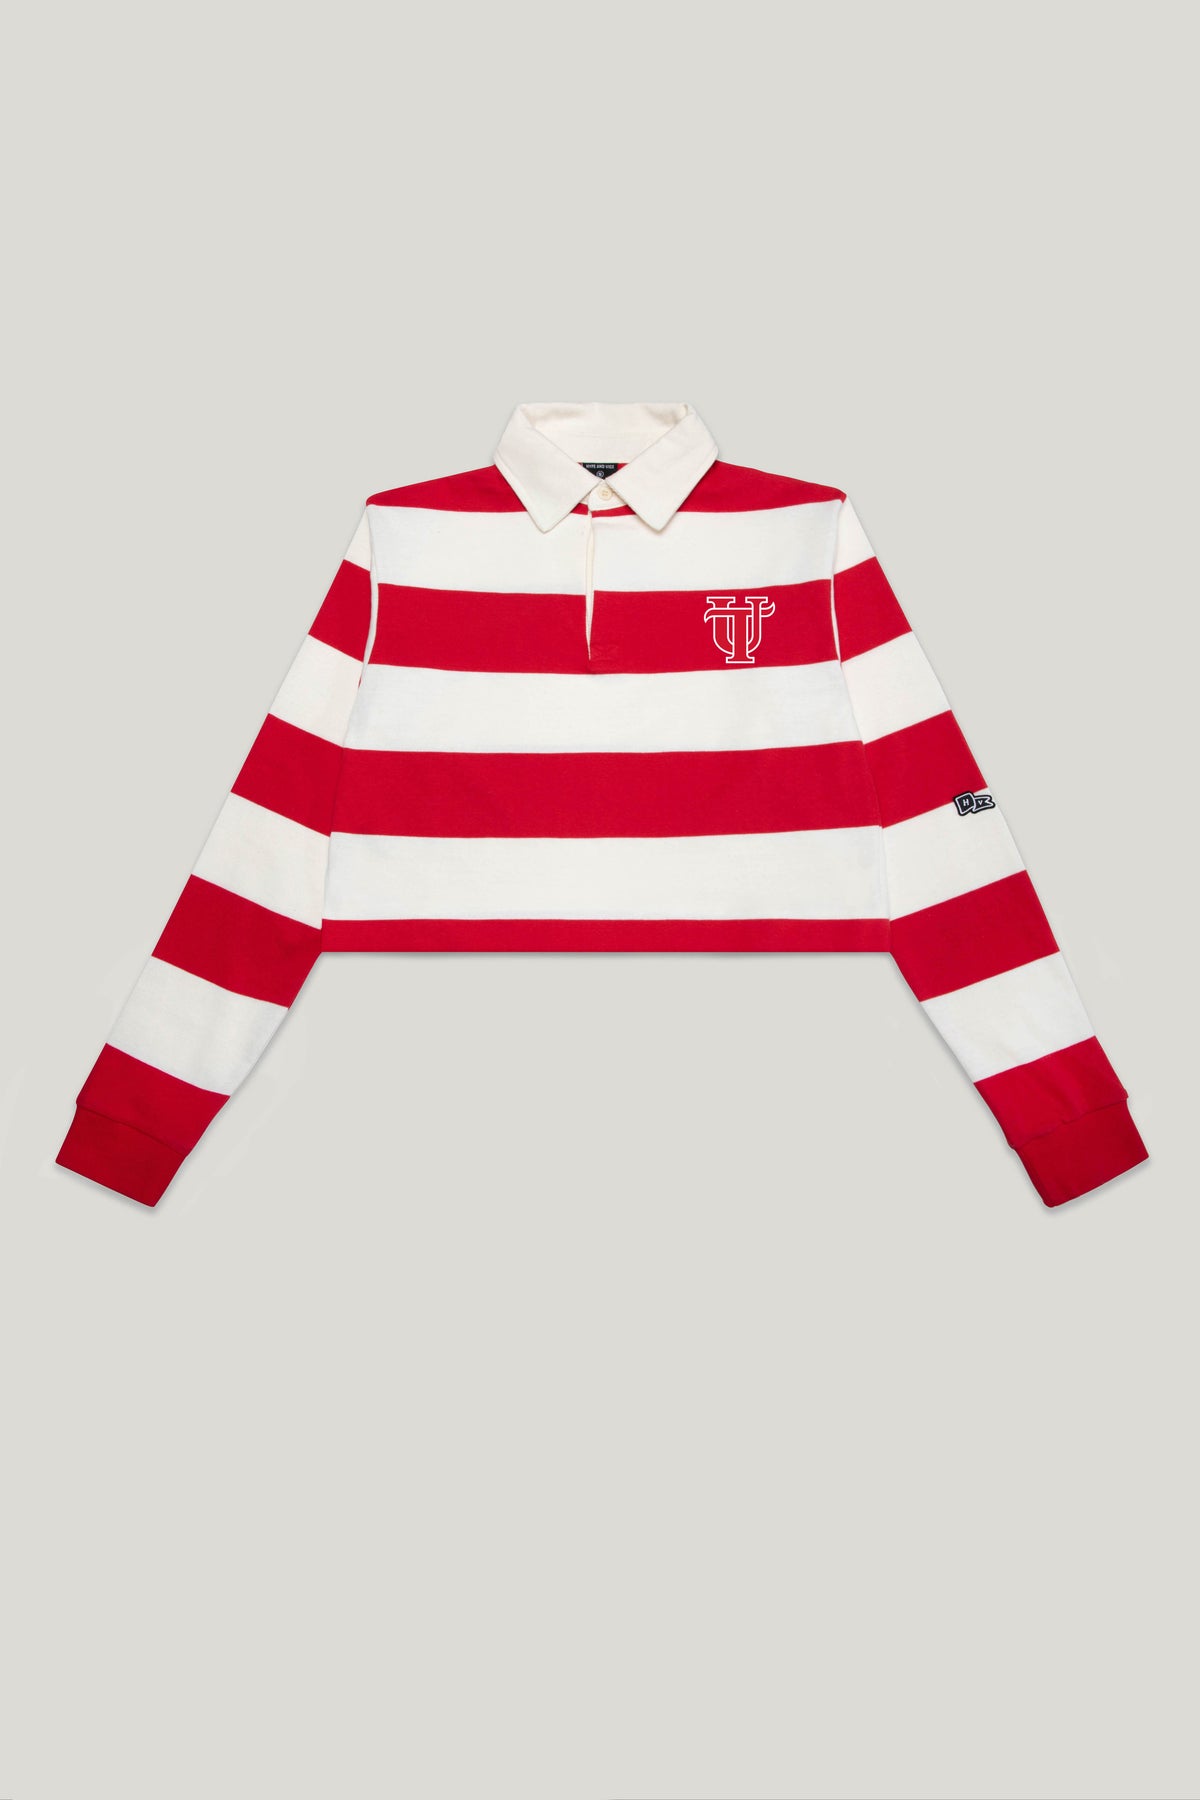 University of Tampa Rugby Top